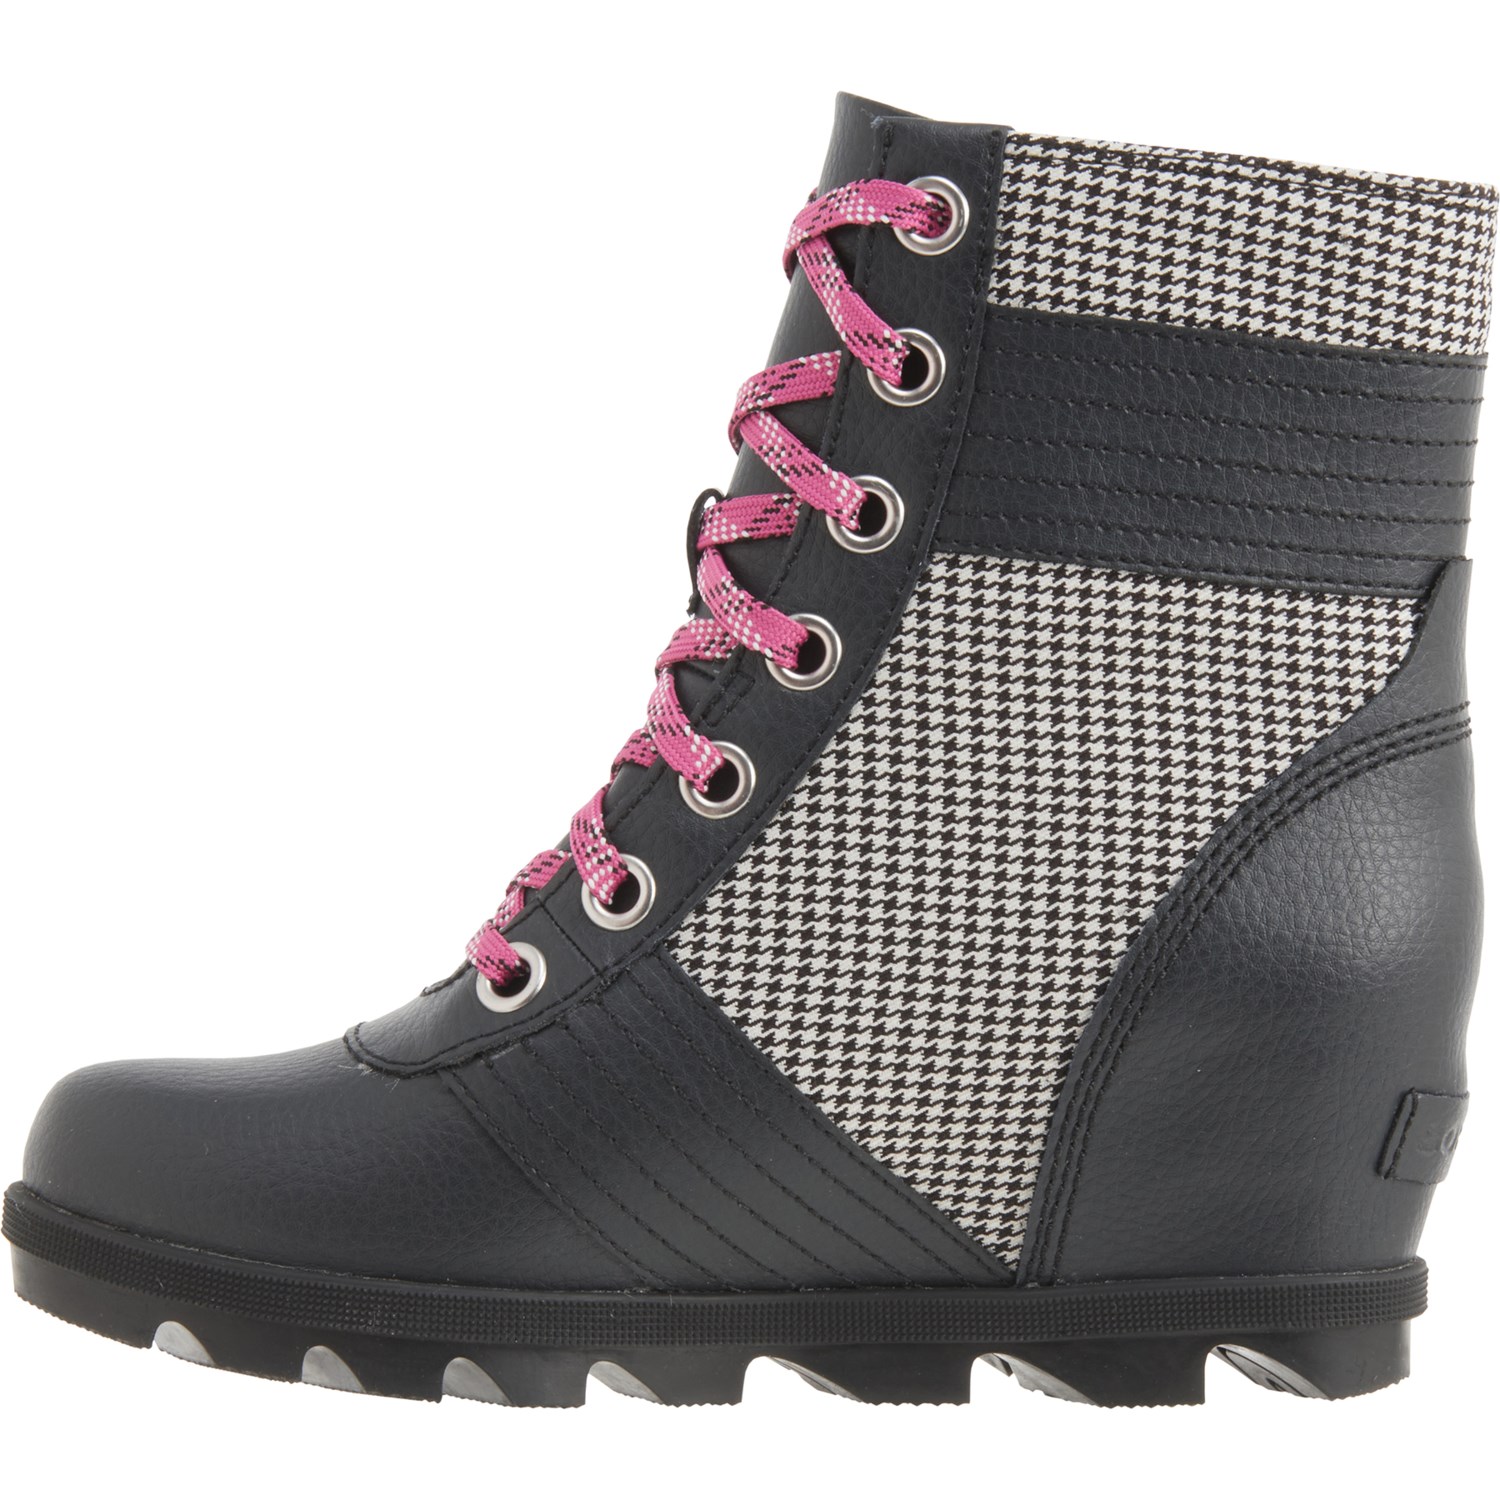 Sorel Lexie Wedge Boots (For Girls)